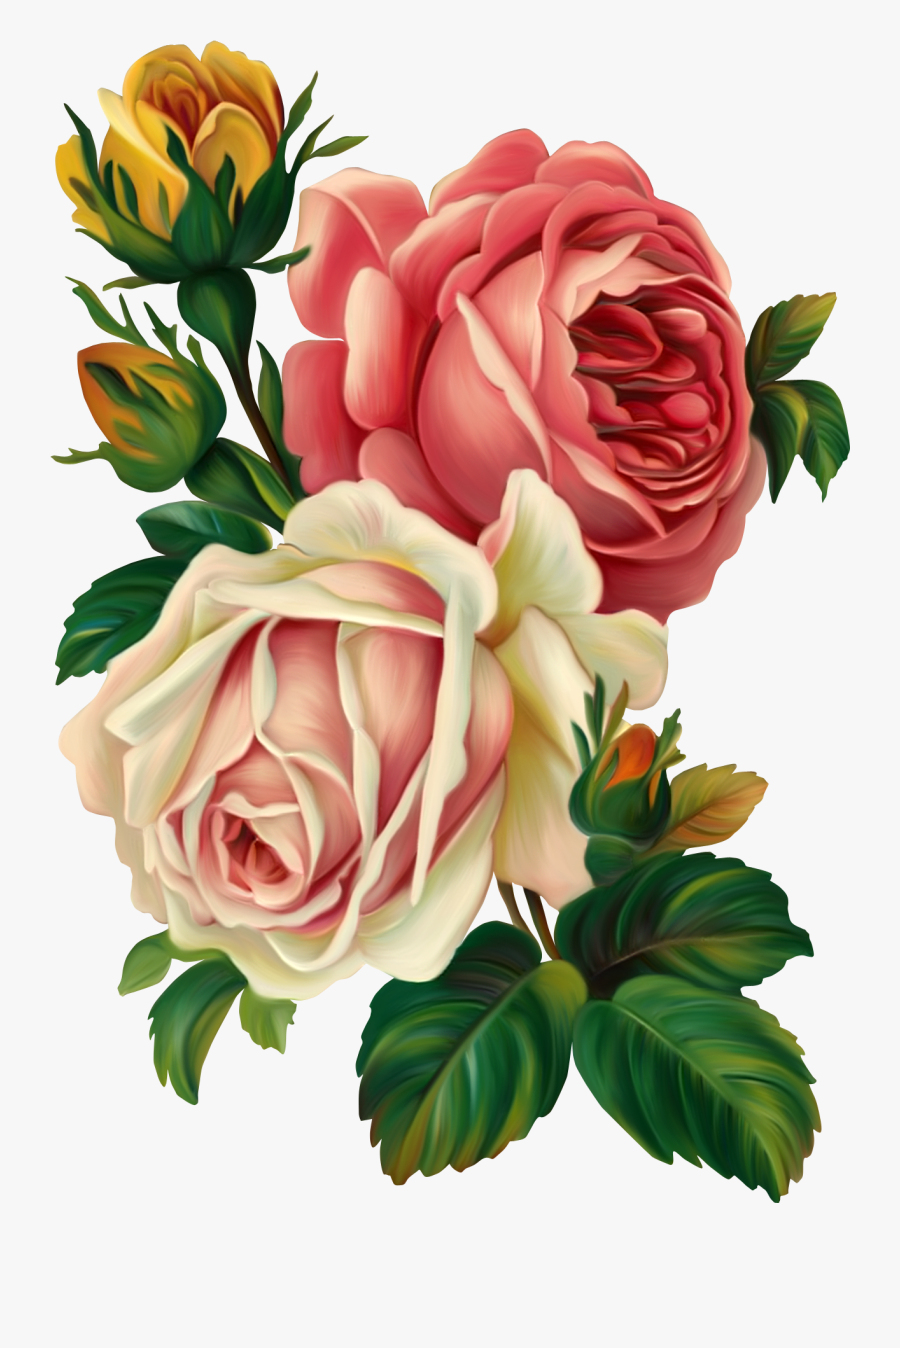 Red Rose Clipart Vintage - Rose Flower Painting, Transparent Clipart